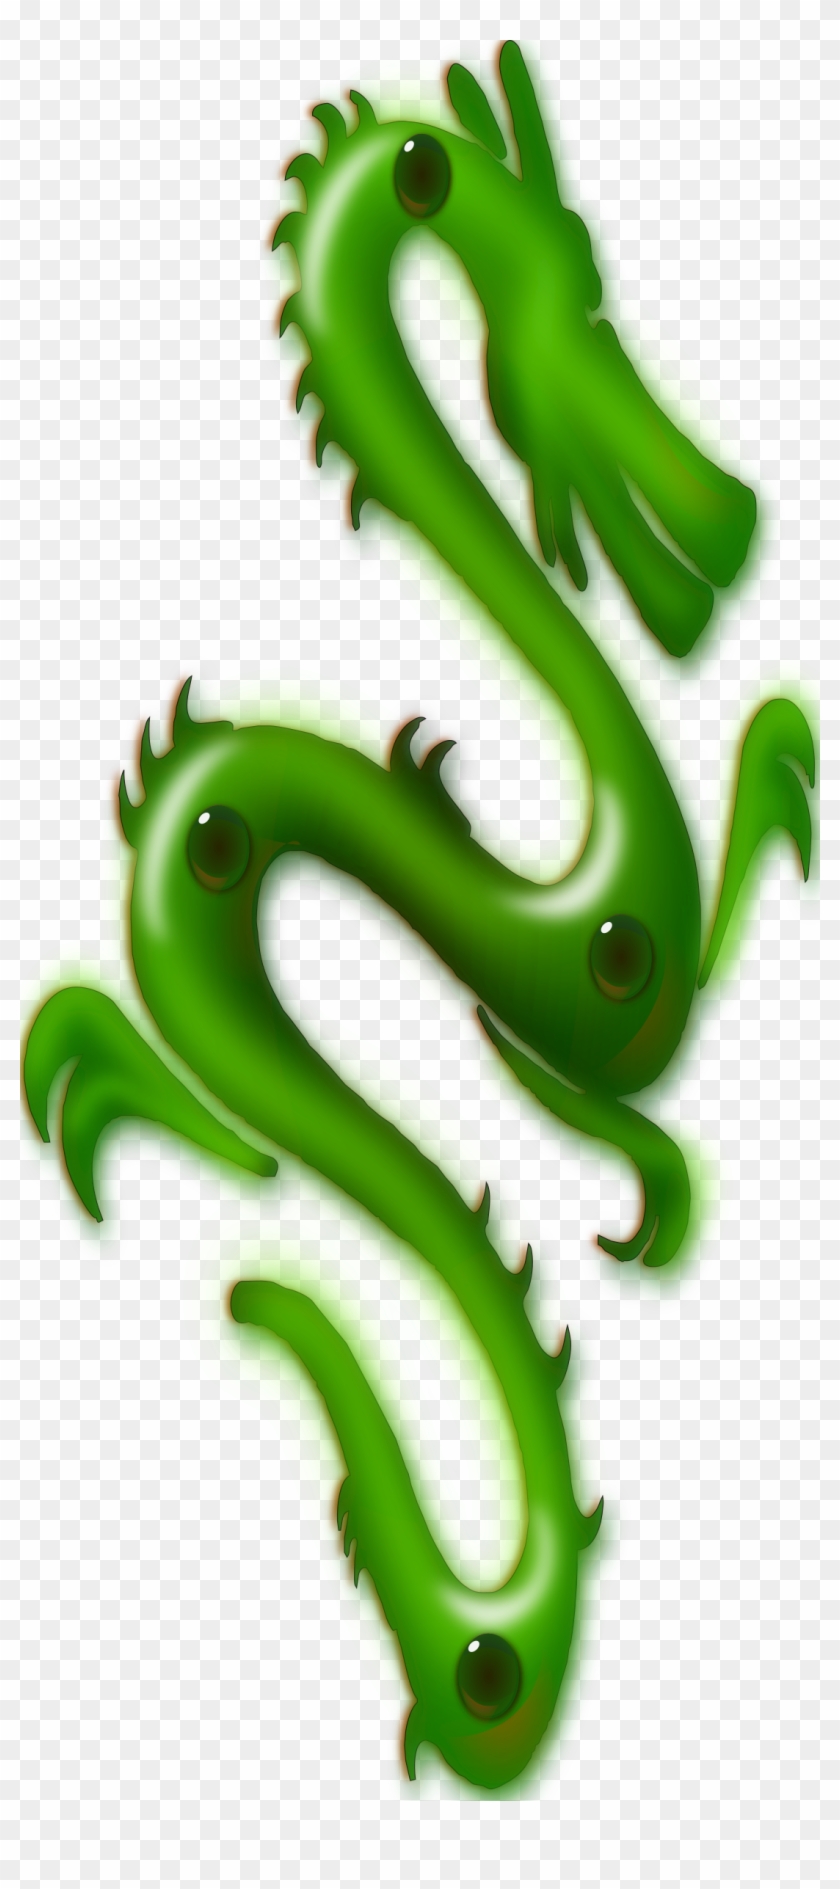 This Free Icons Png Design Of Jade Dragon Clipart #309237